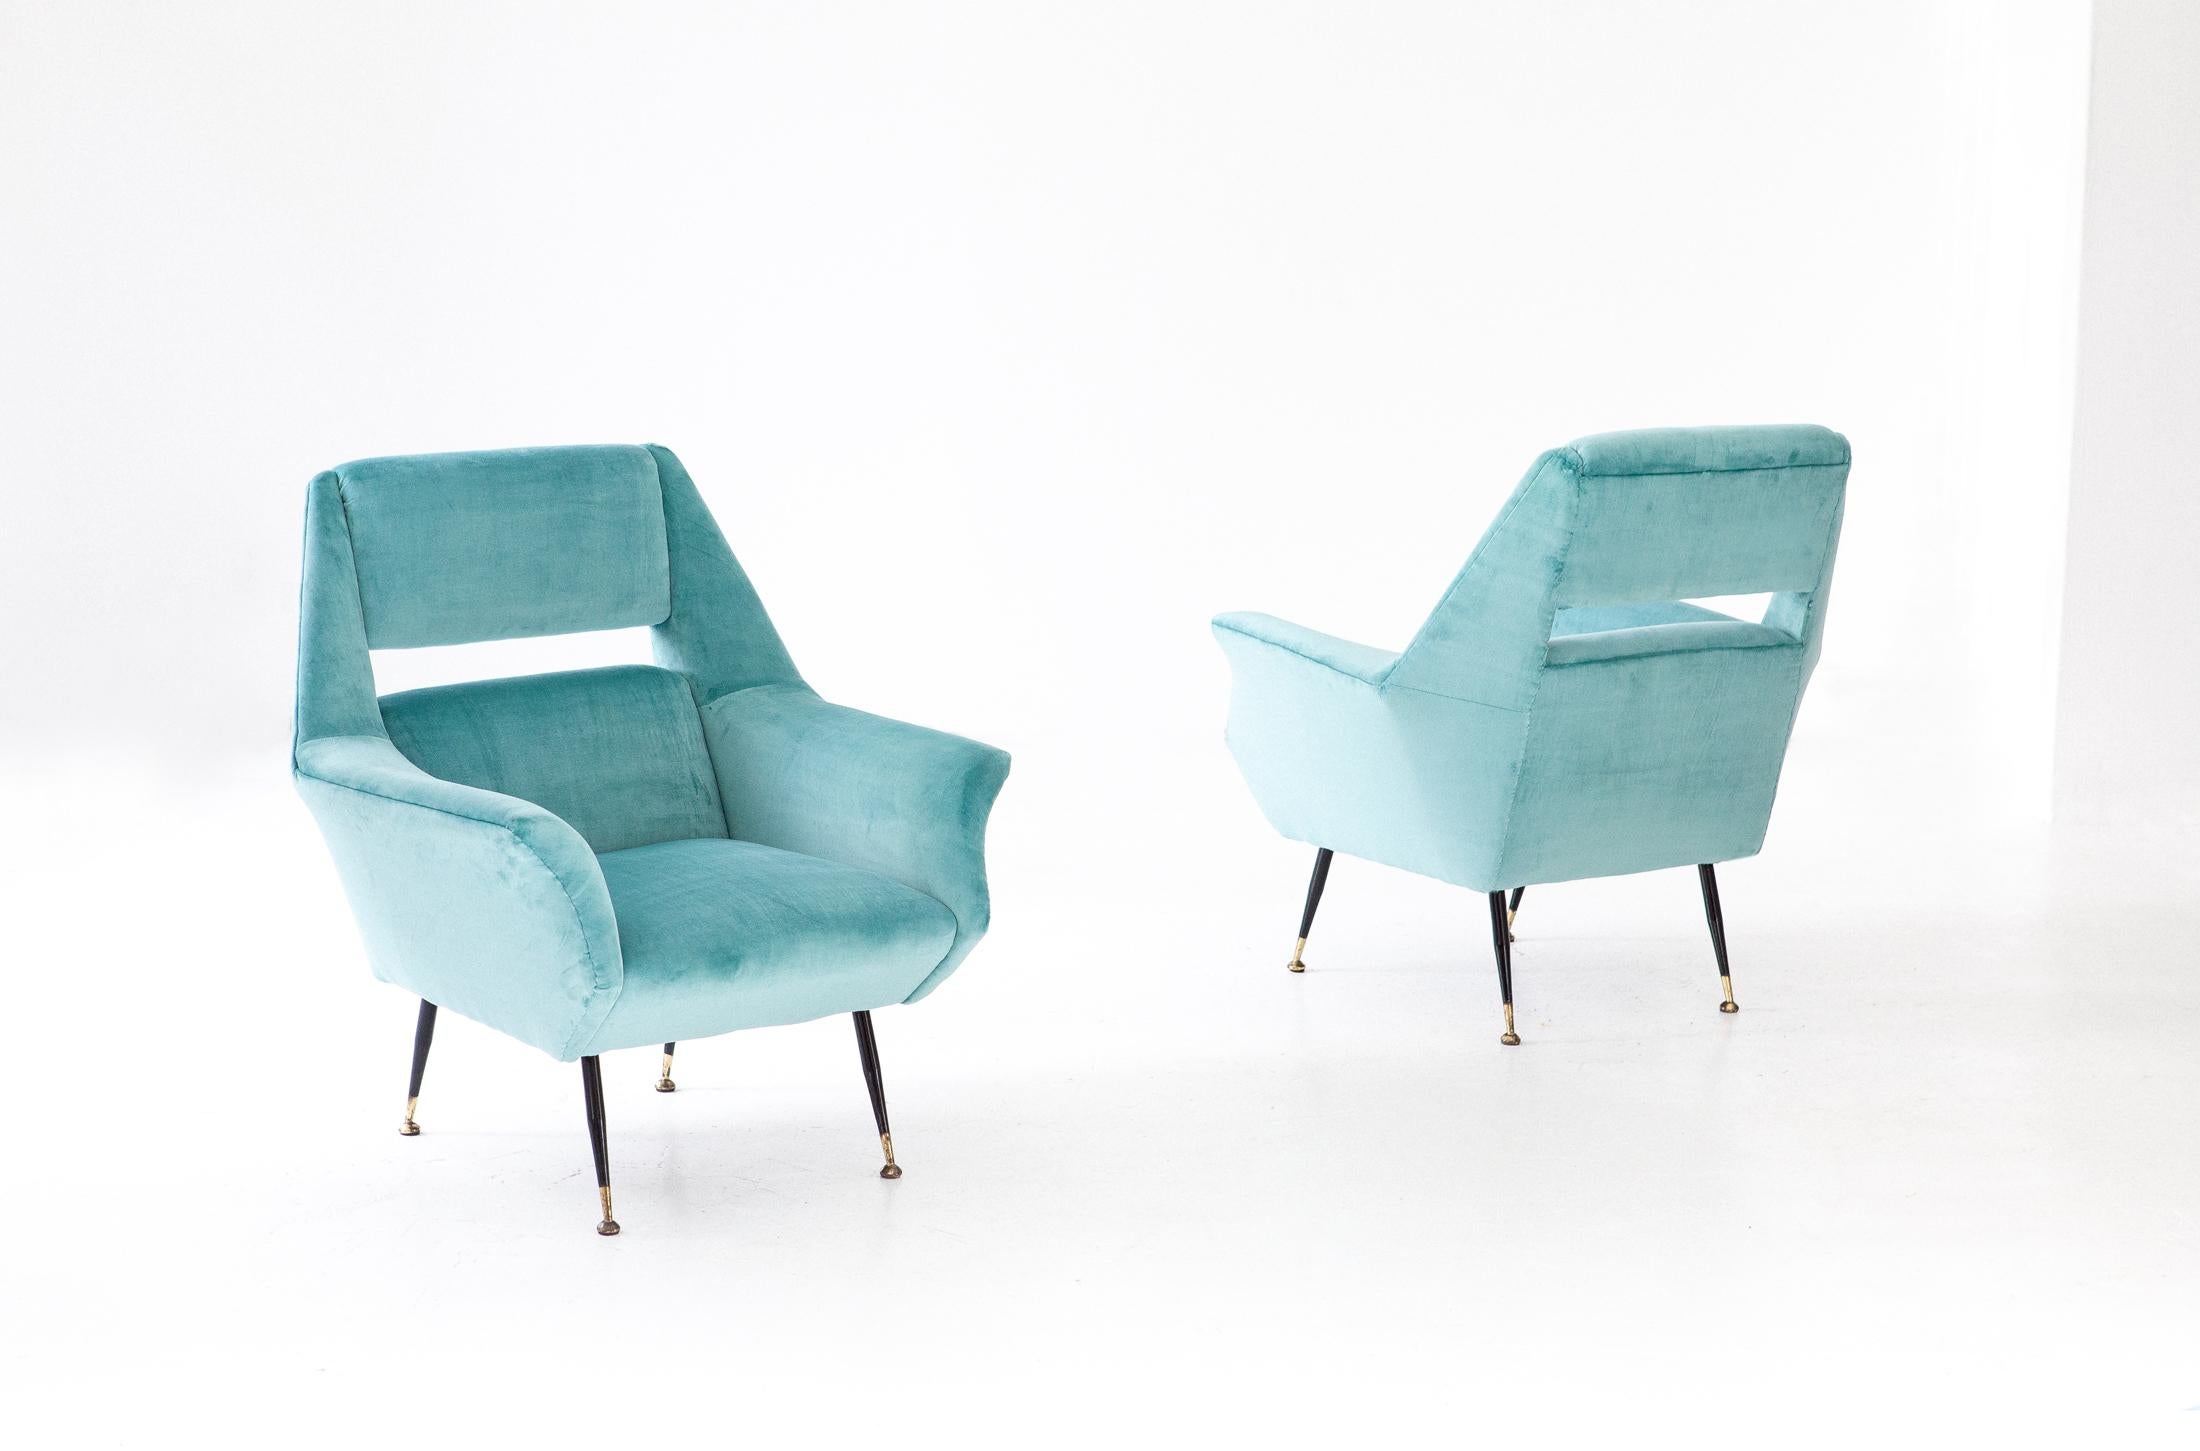 Set of two rare armchairs designed by Gigi Radice and produced by Minotti in Italy during the 1950s.

These original retro' chairs has been reupholstered with new velvet, also the padding is new. A turquoise that goes more 'towards the light blue